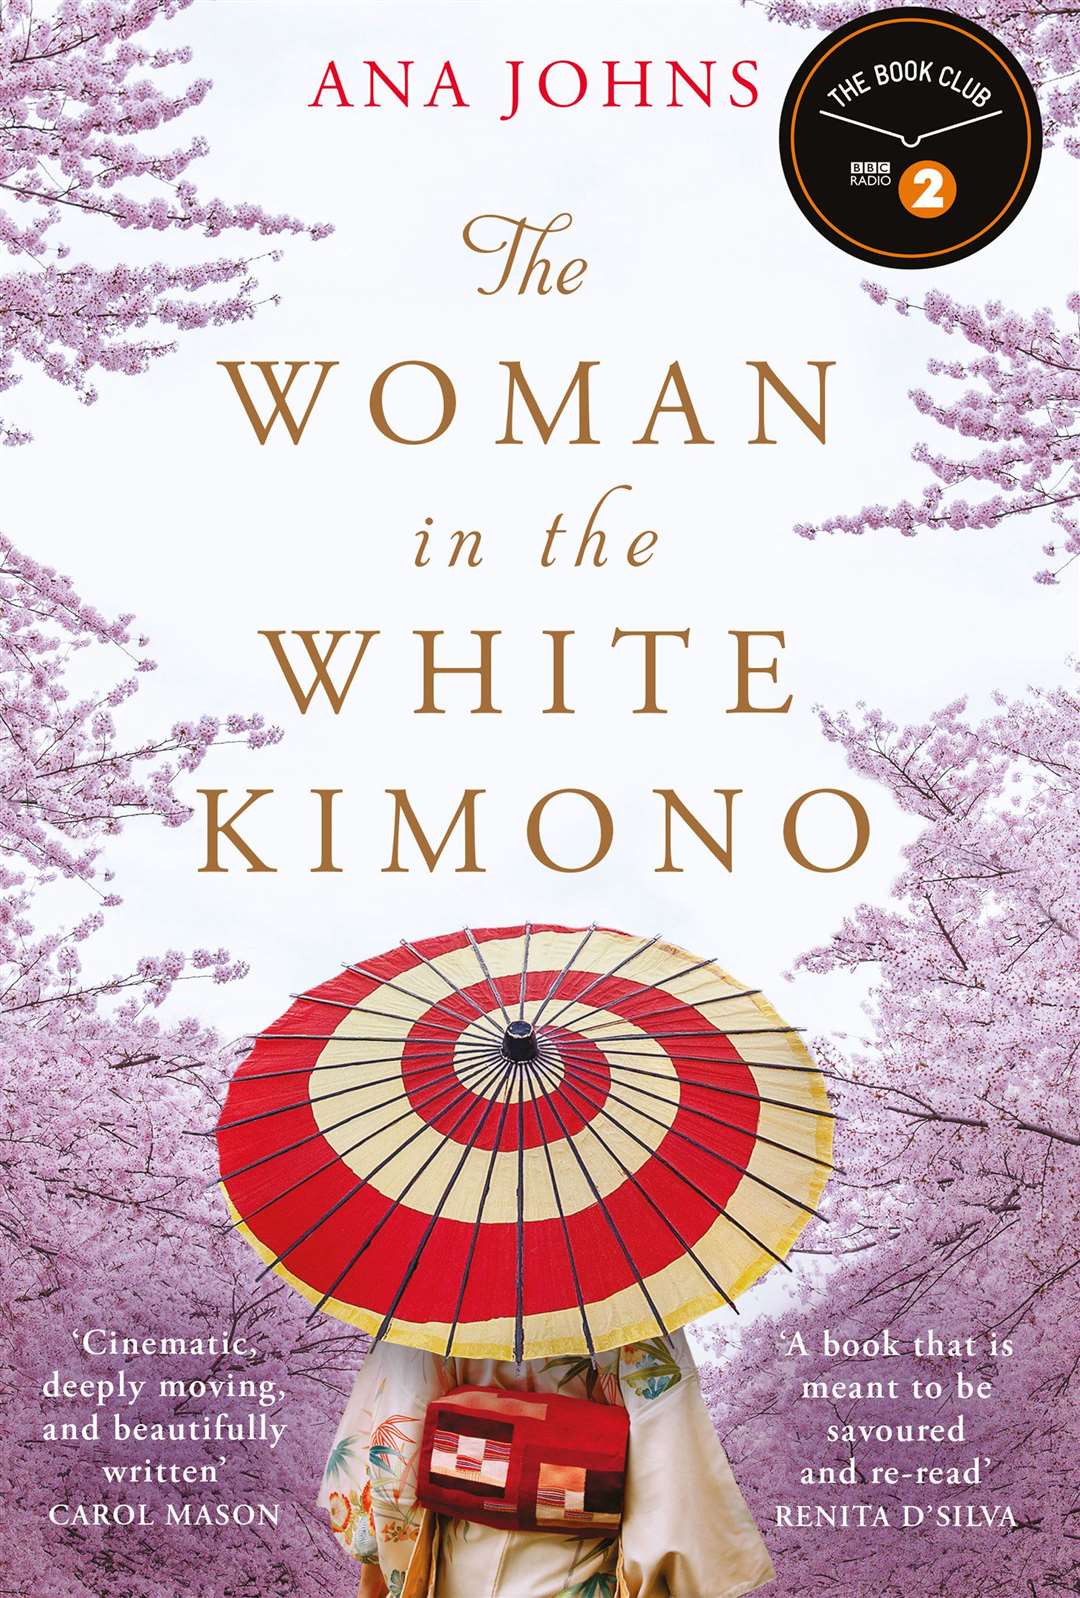 The Woman In The White Kimono by Ana Johns Picture: Legend Press/PA